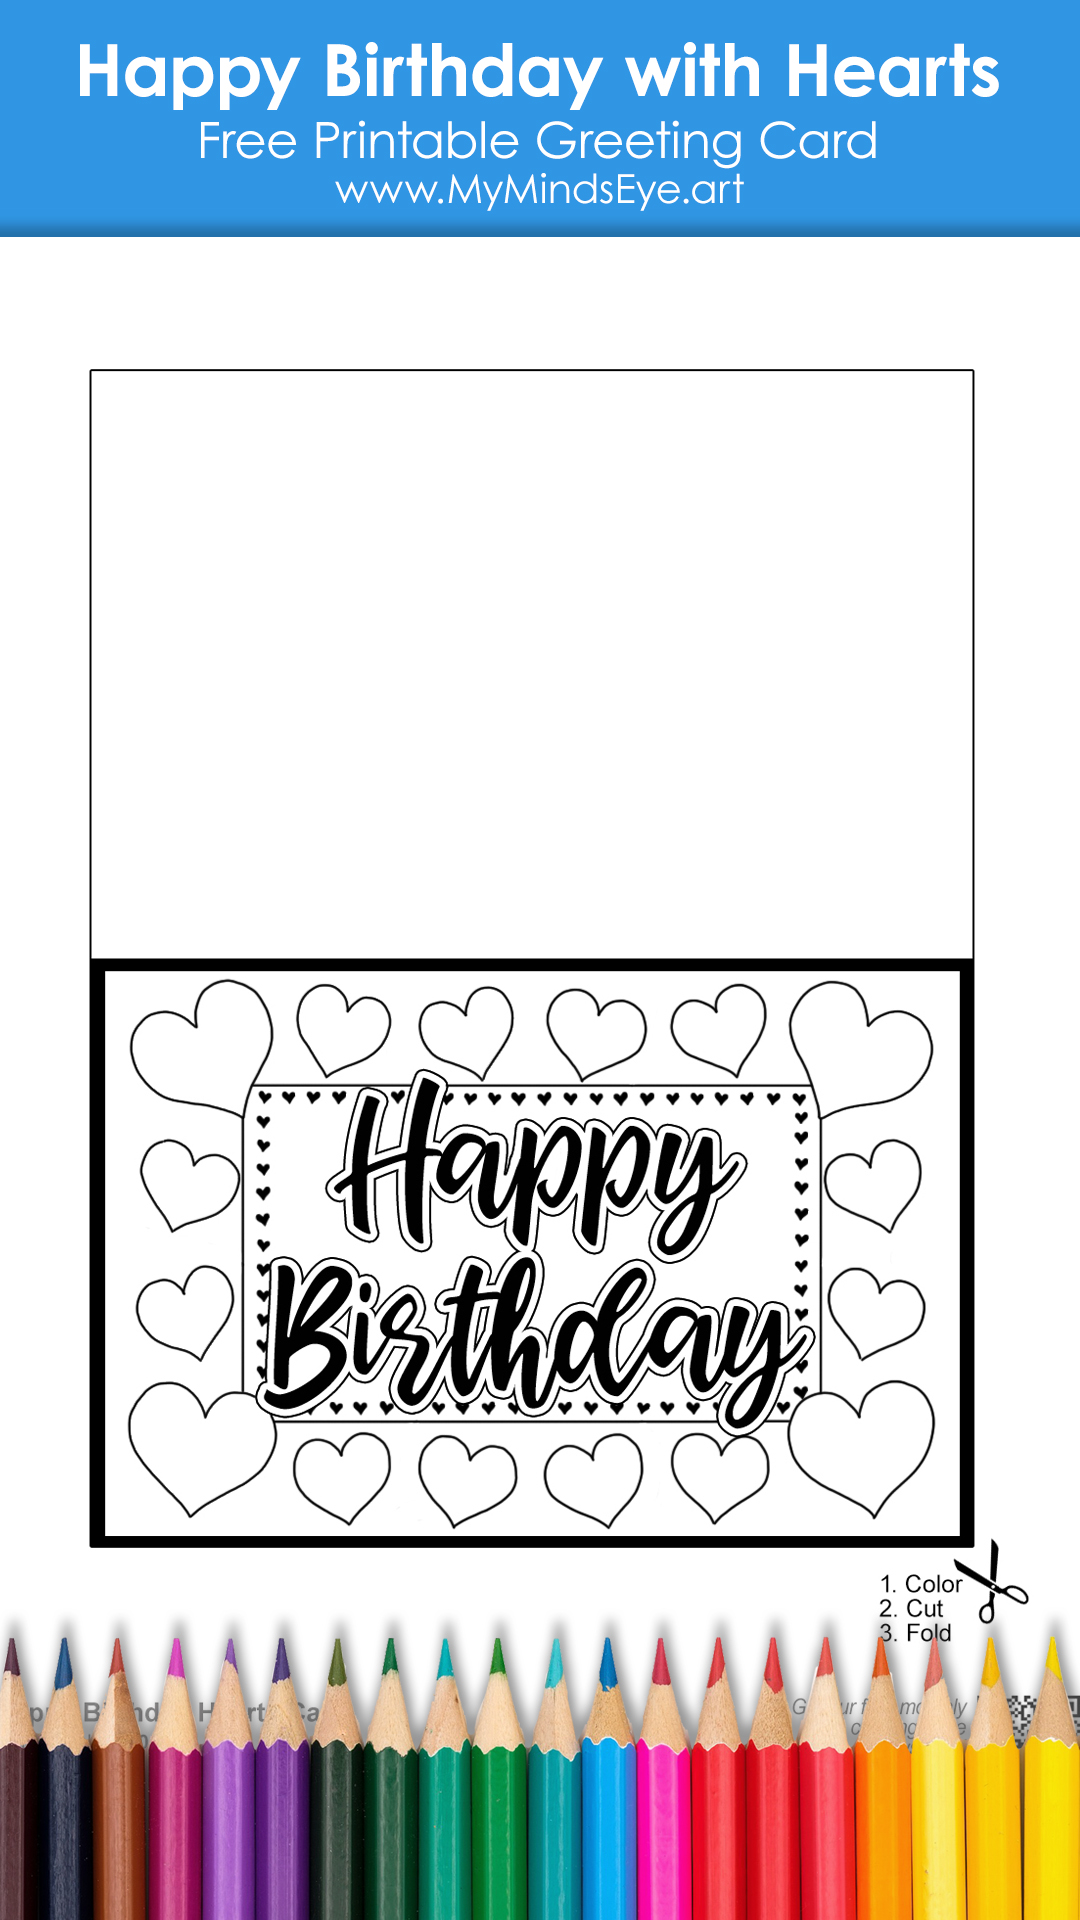 Coloring page with Happy Birthday card design on it.